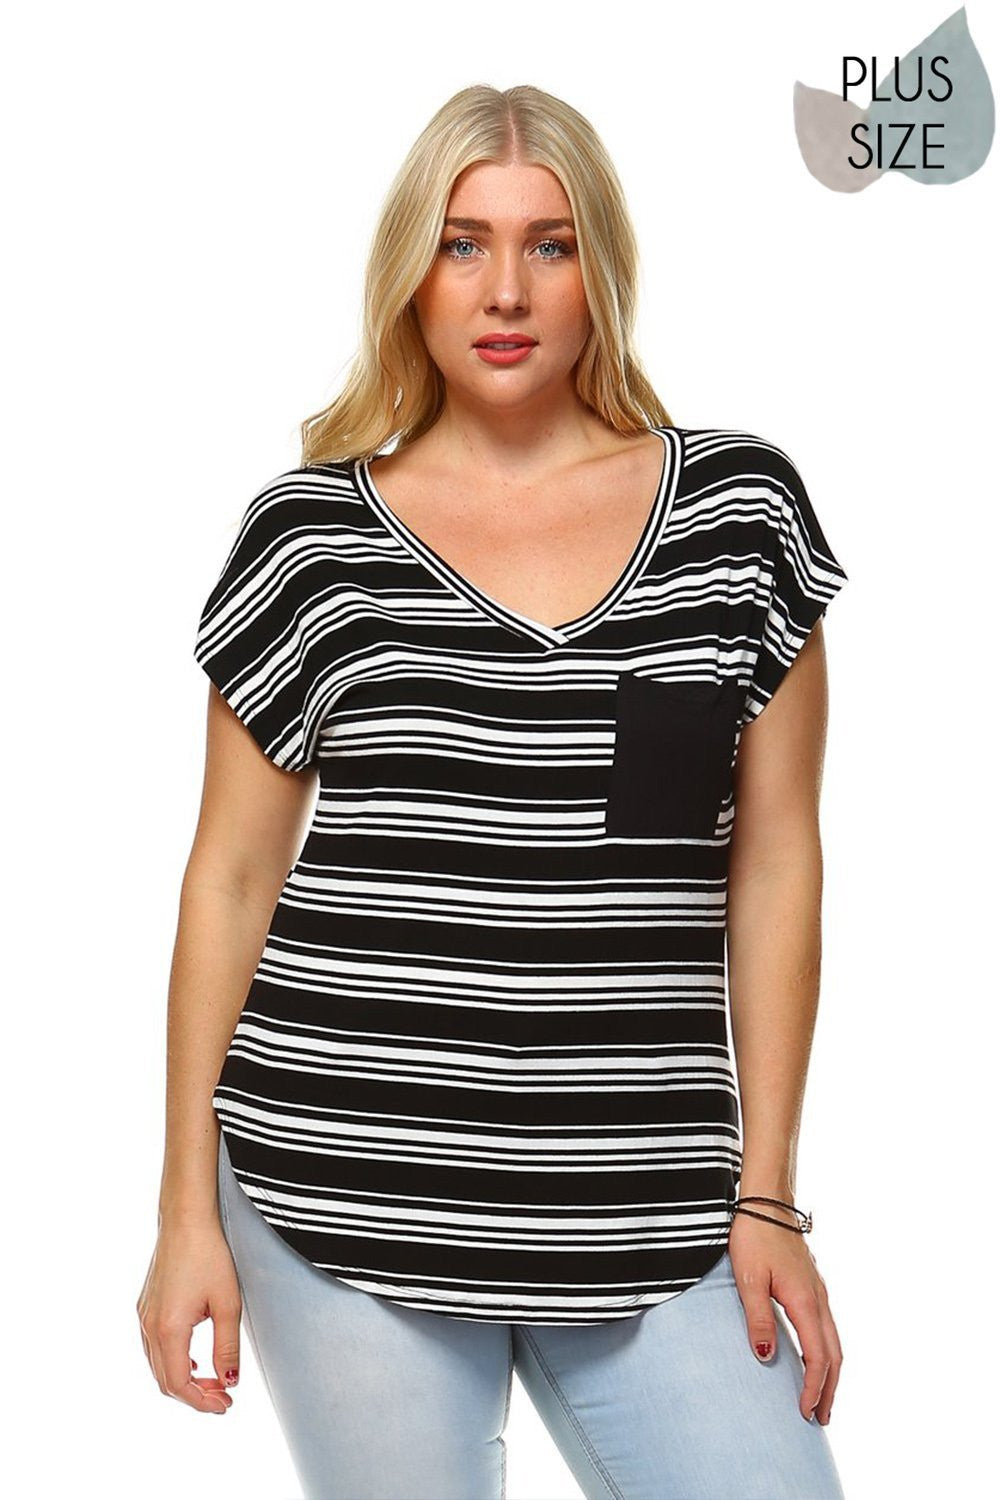 Black&White Striped V-neck capped sleeve top with single front chest pocket and crescent hem Perfect for Spring & Summer, Evening wear, Festival, Beach Day, Vacation, Dance, Poolside Parties